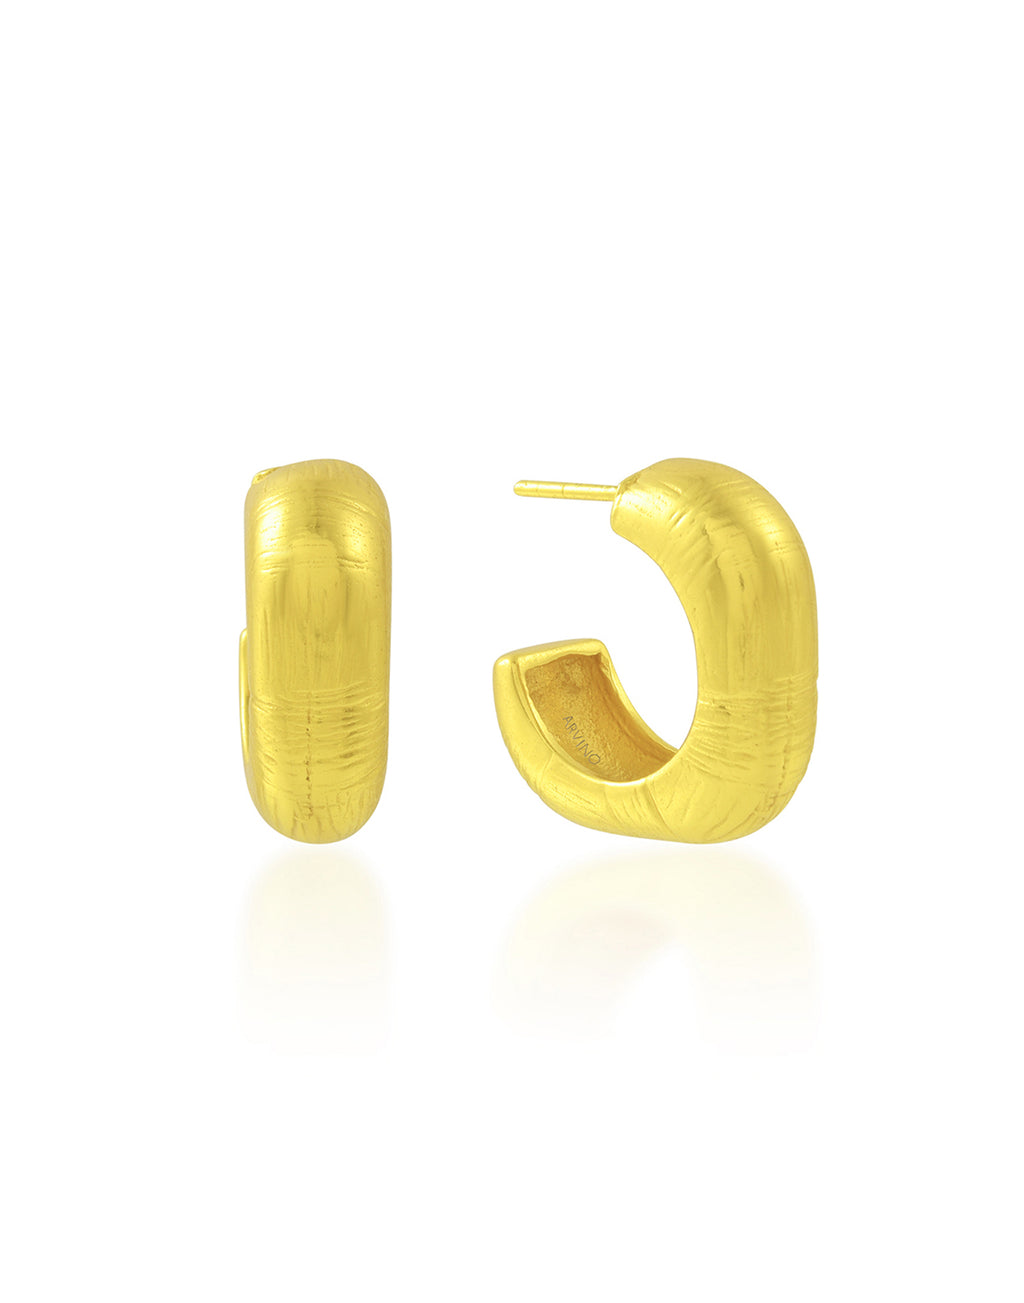 Textured Square Hoops - Statement Earrings - Gold-Plated & Hypoallergenic Jewellery - Made in India - Dubai Jewellery - Dori